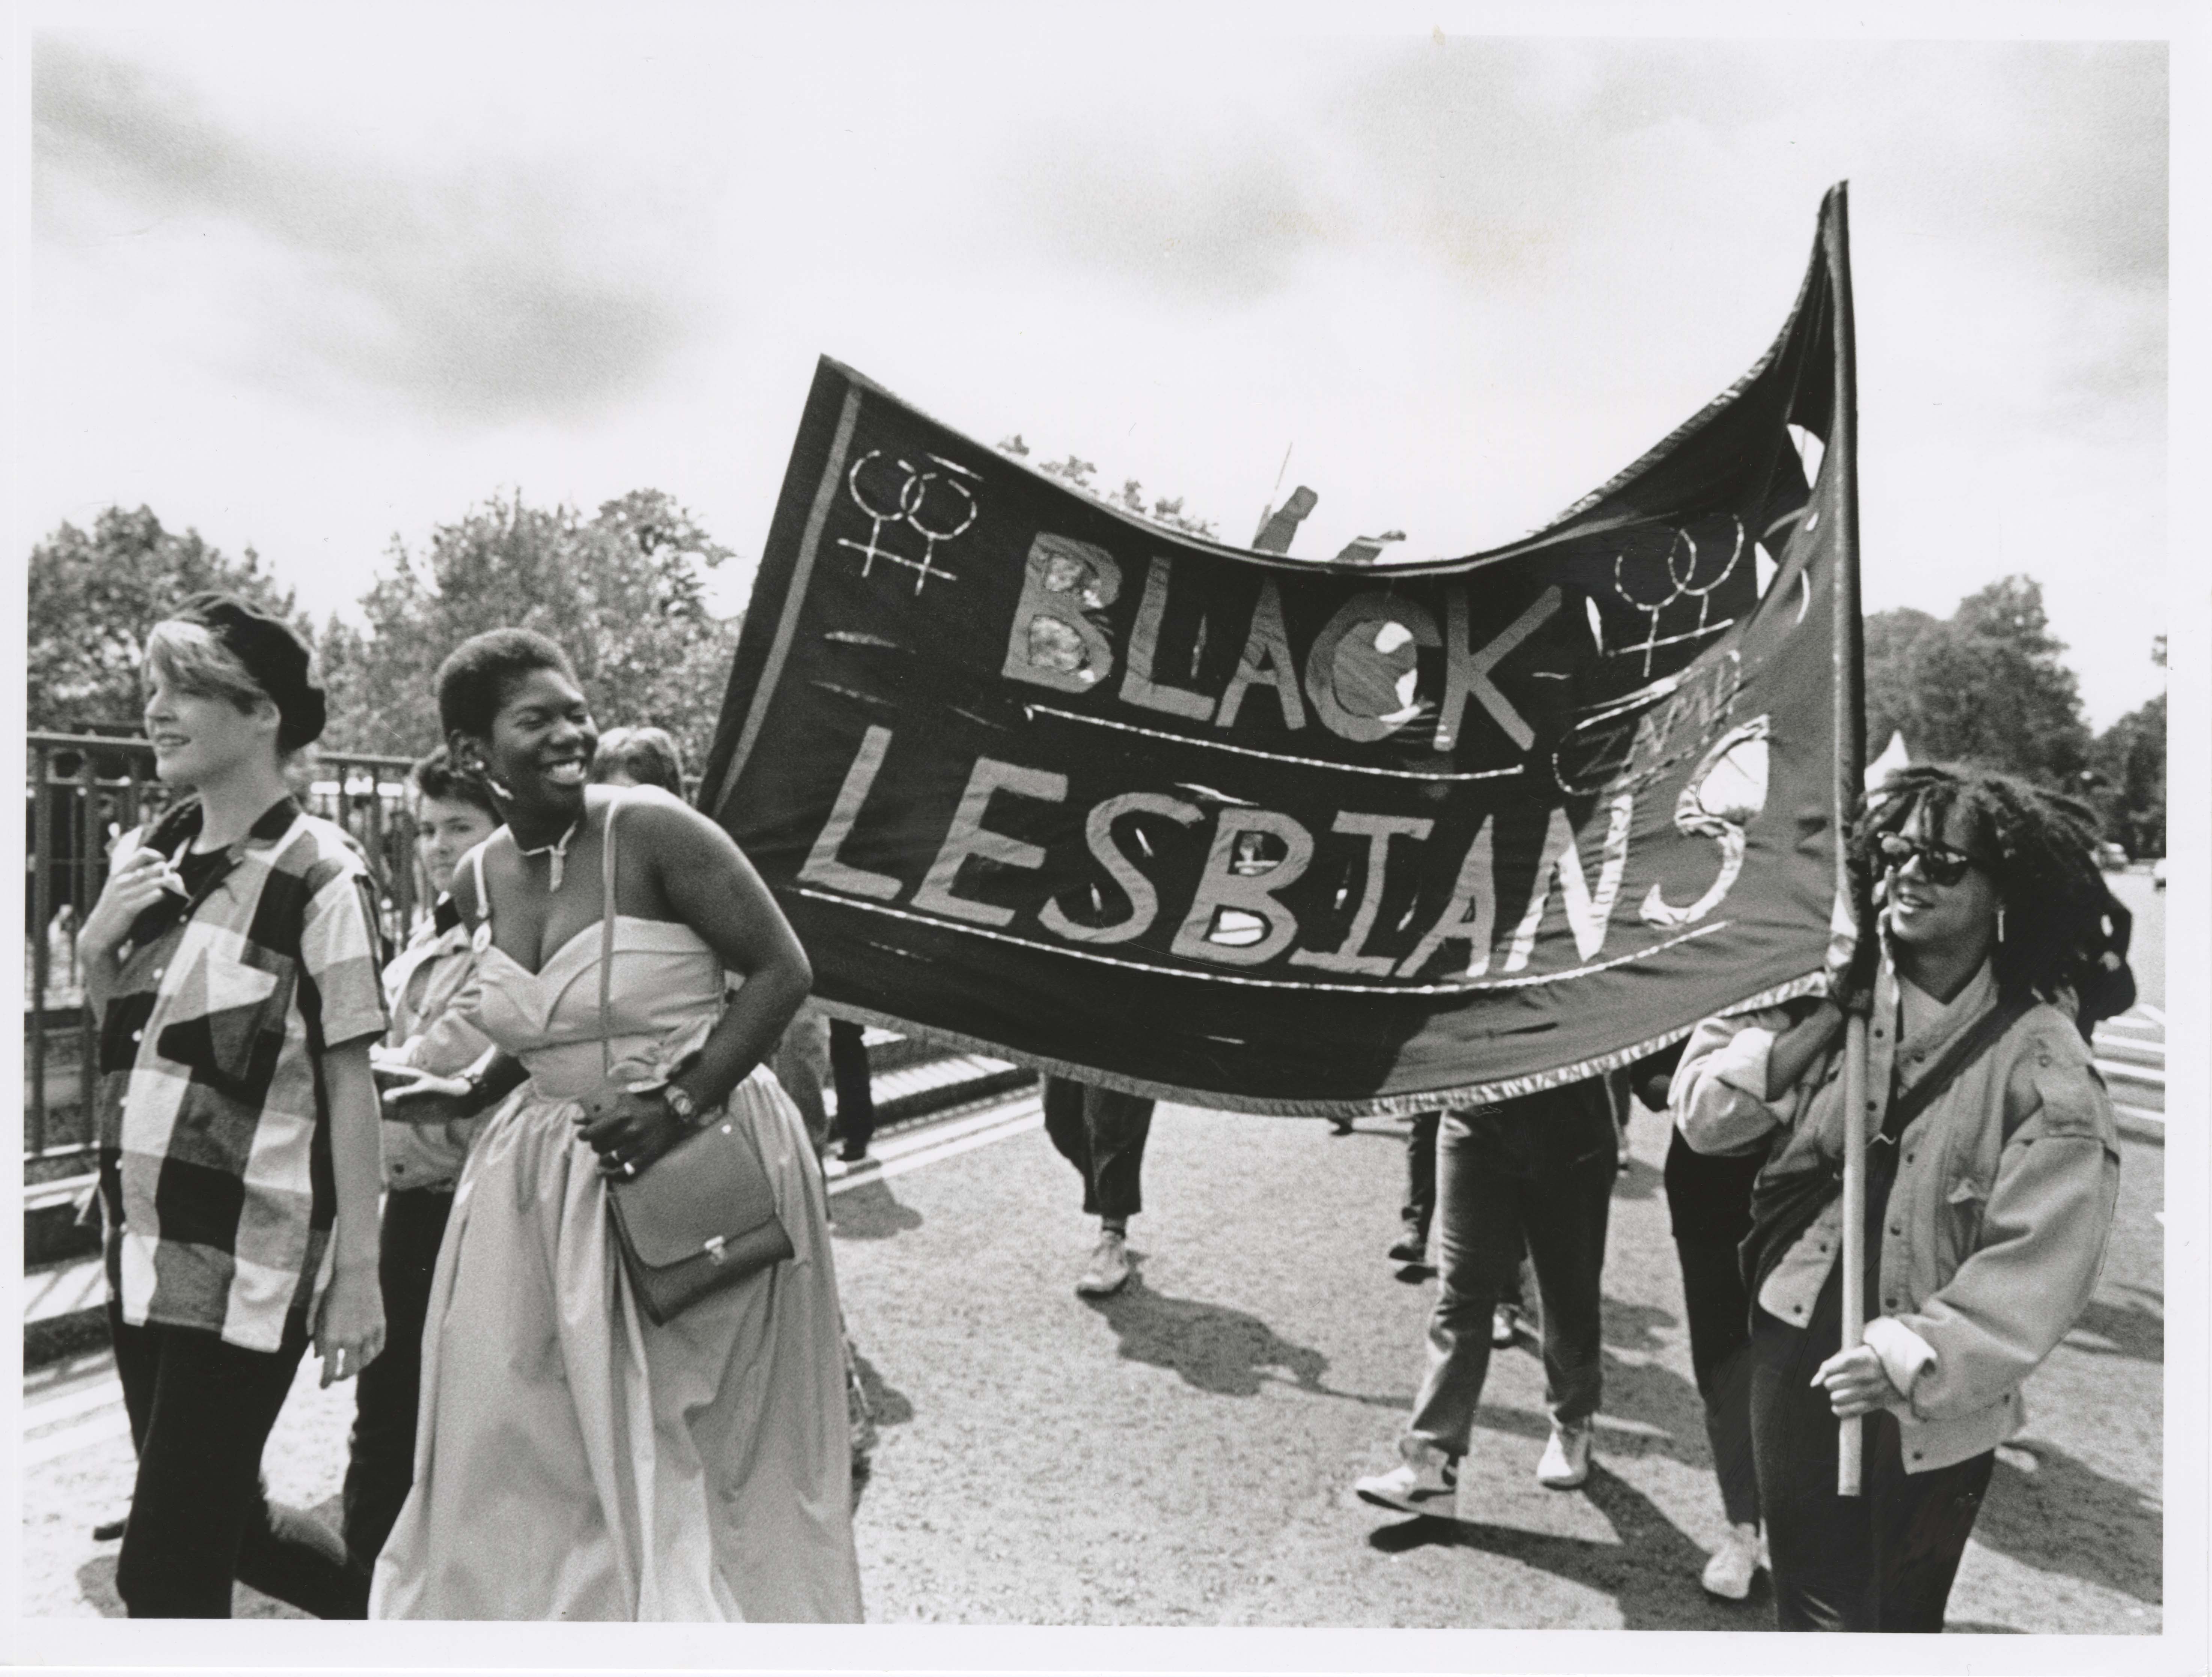 Femi Otitoju, right, at the Lesbian Strength March in London on 22 June 1985